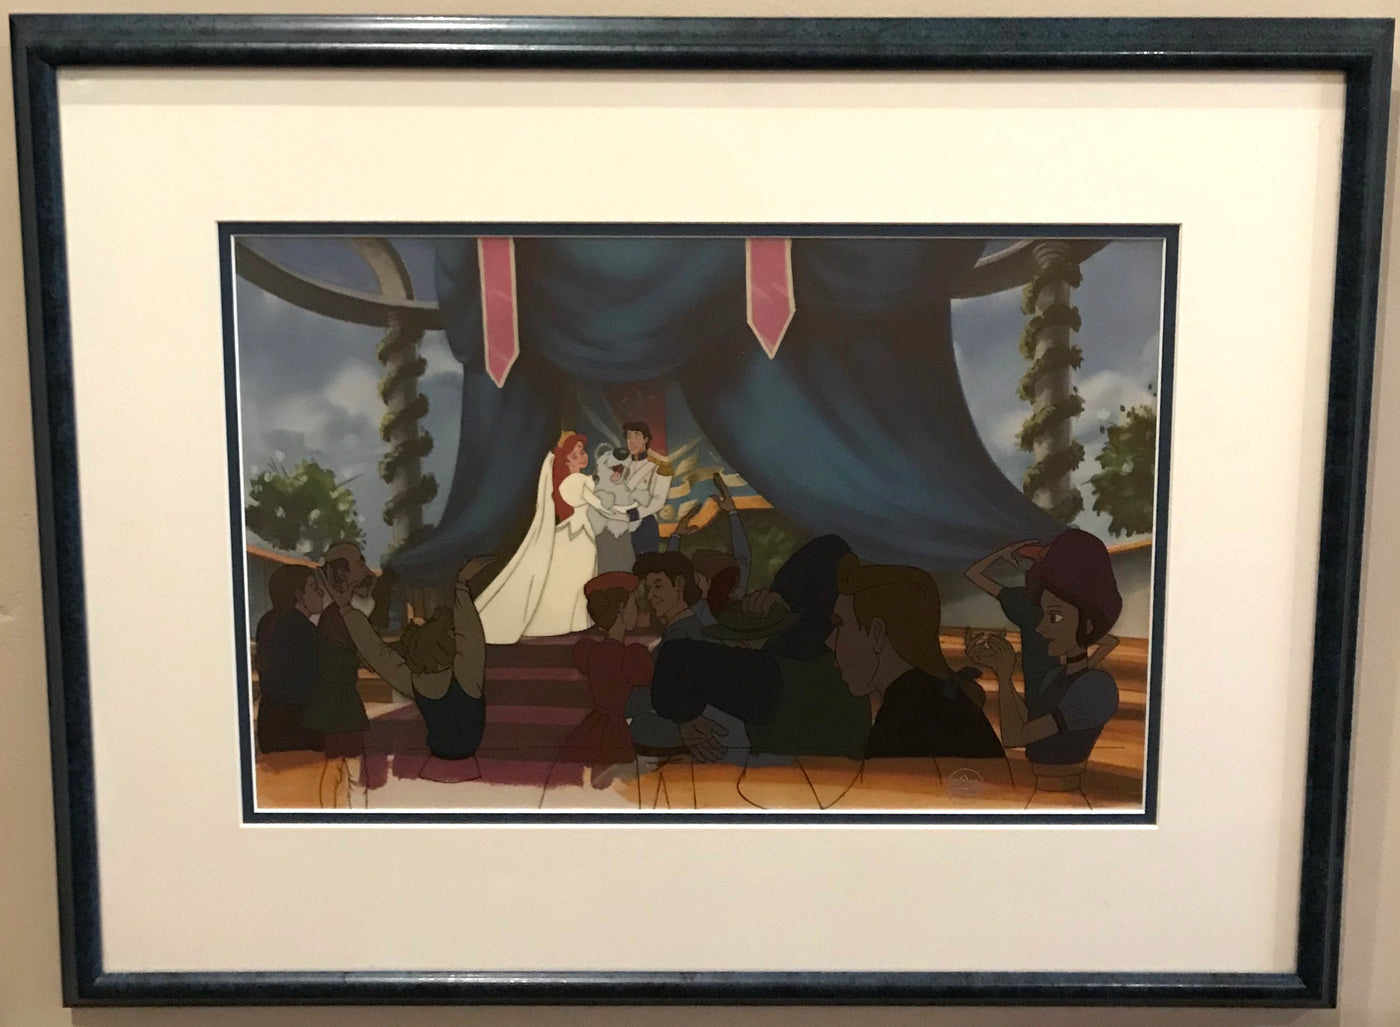 Original Walt Disney Production Cel from The Little Mermaid featuring Ariel and Eric